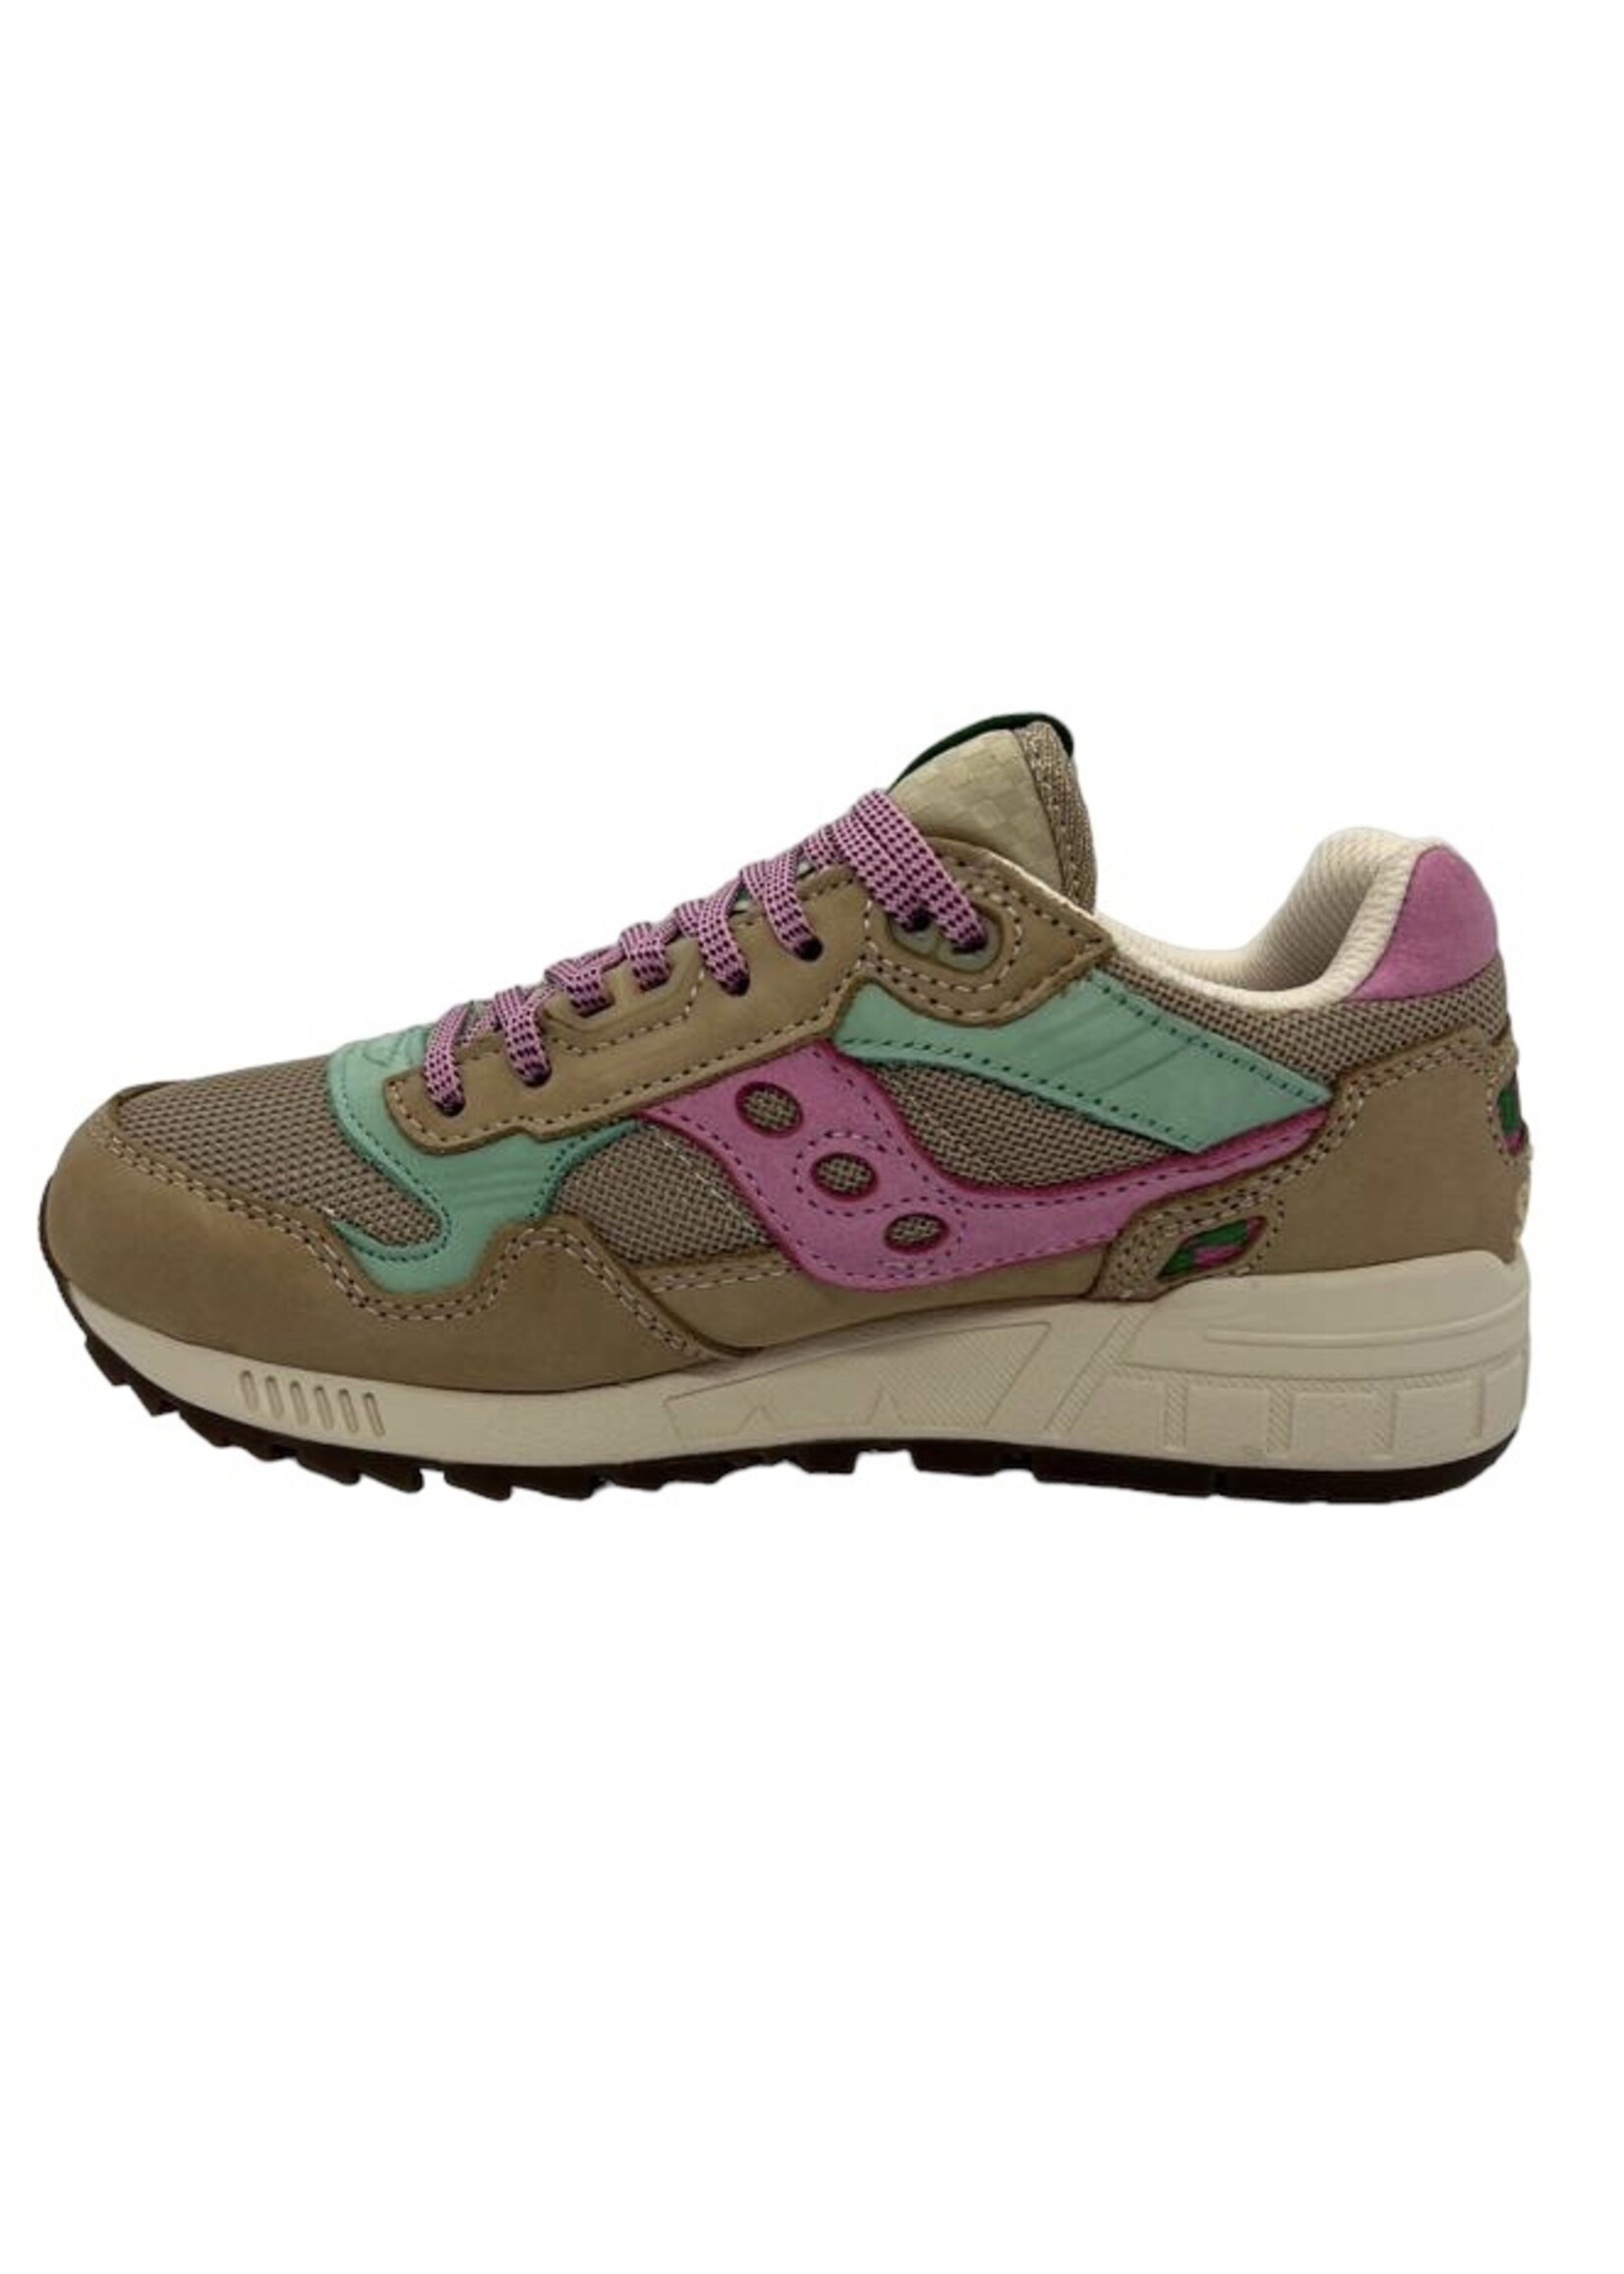 Saucony shadow 5000 earth citizen gray/pink